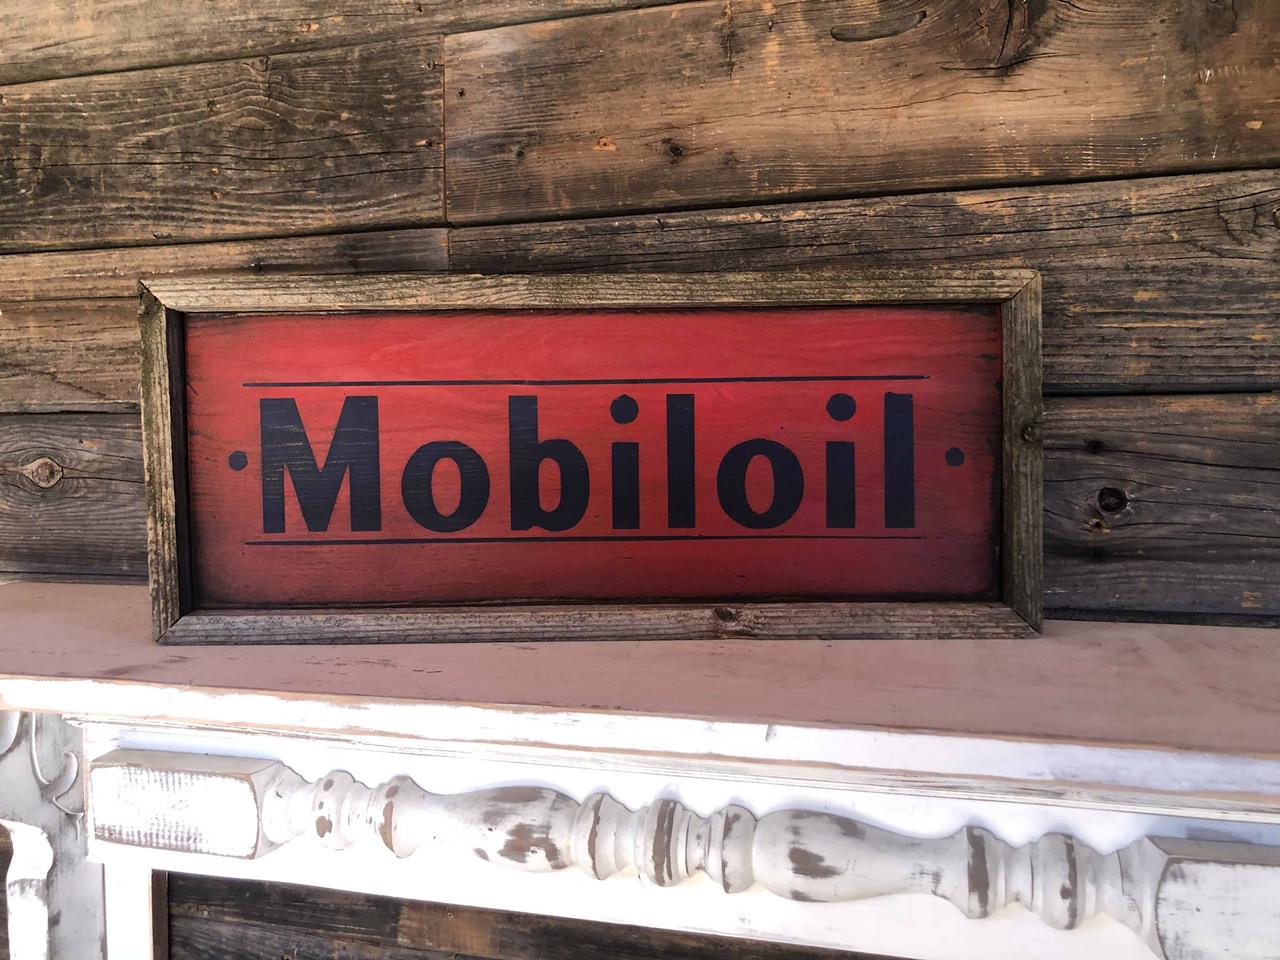 69.00 vintage style Mobile Oil sign .